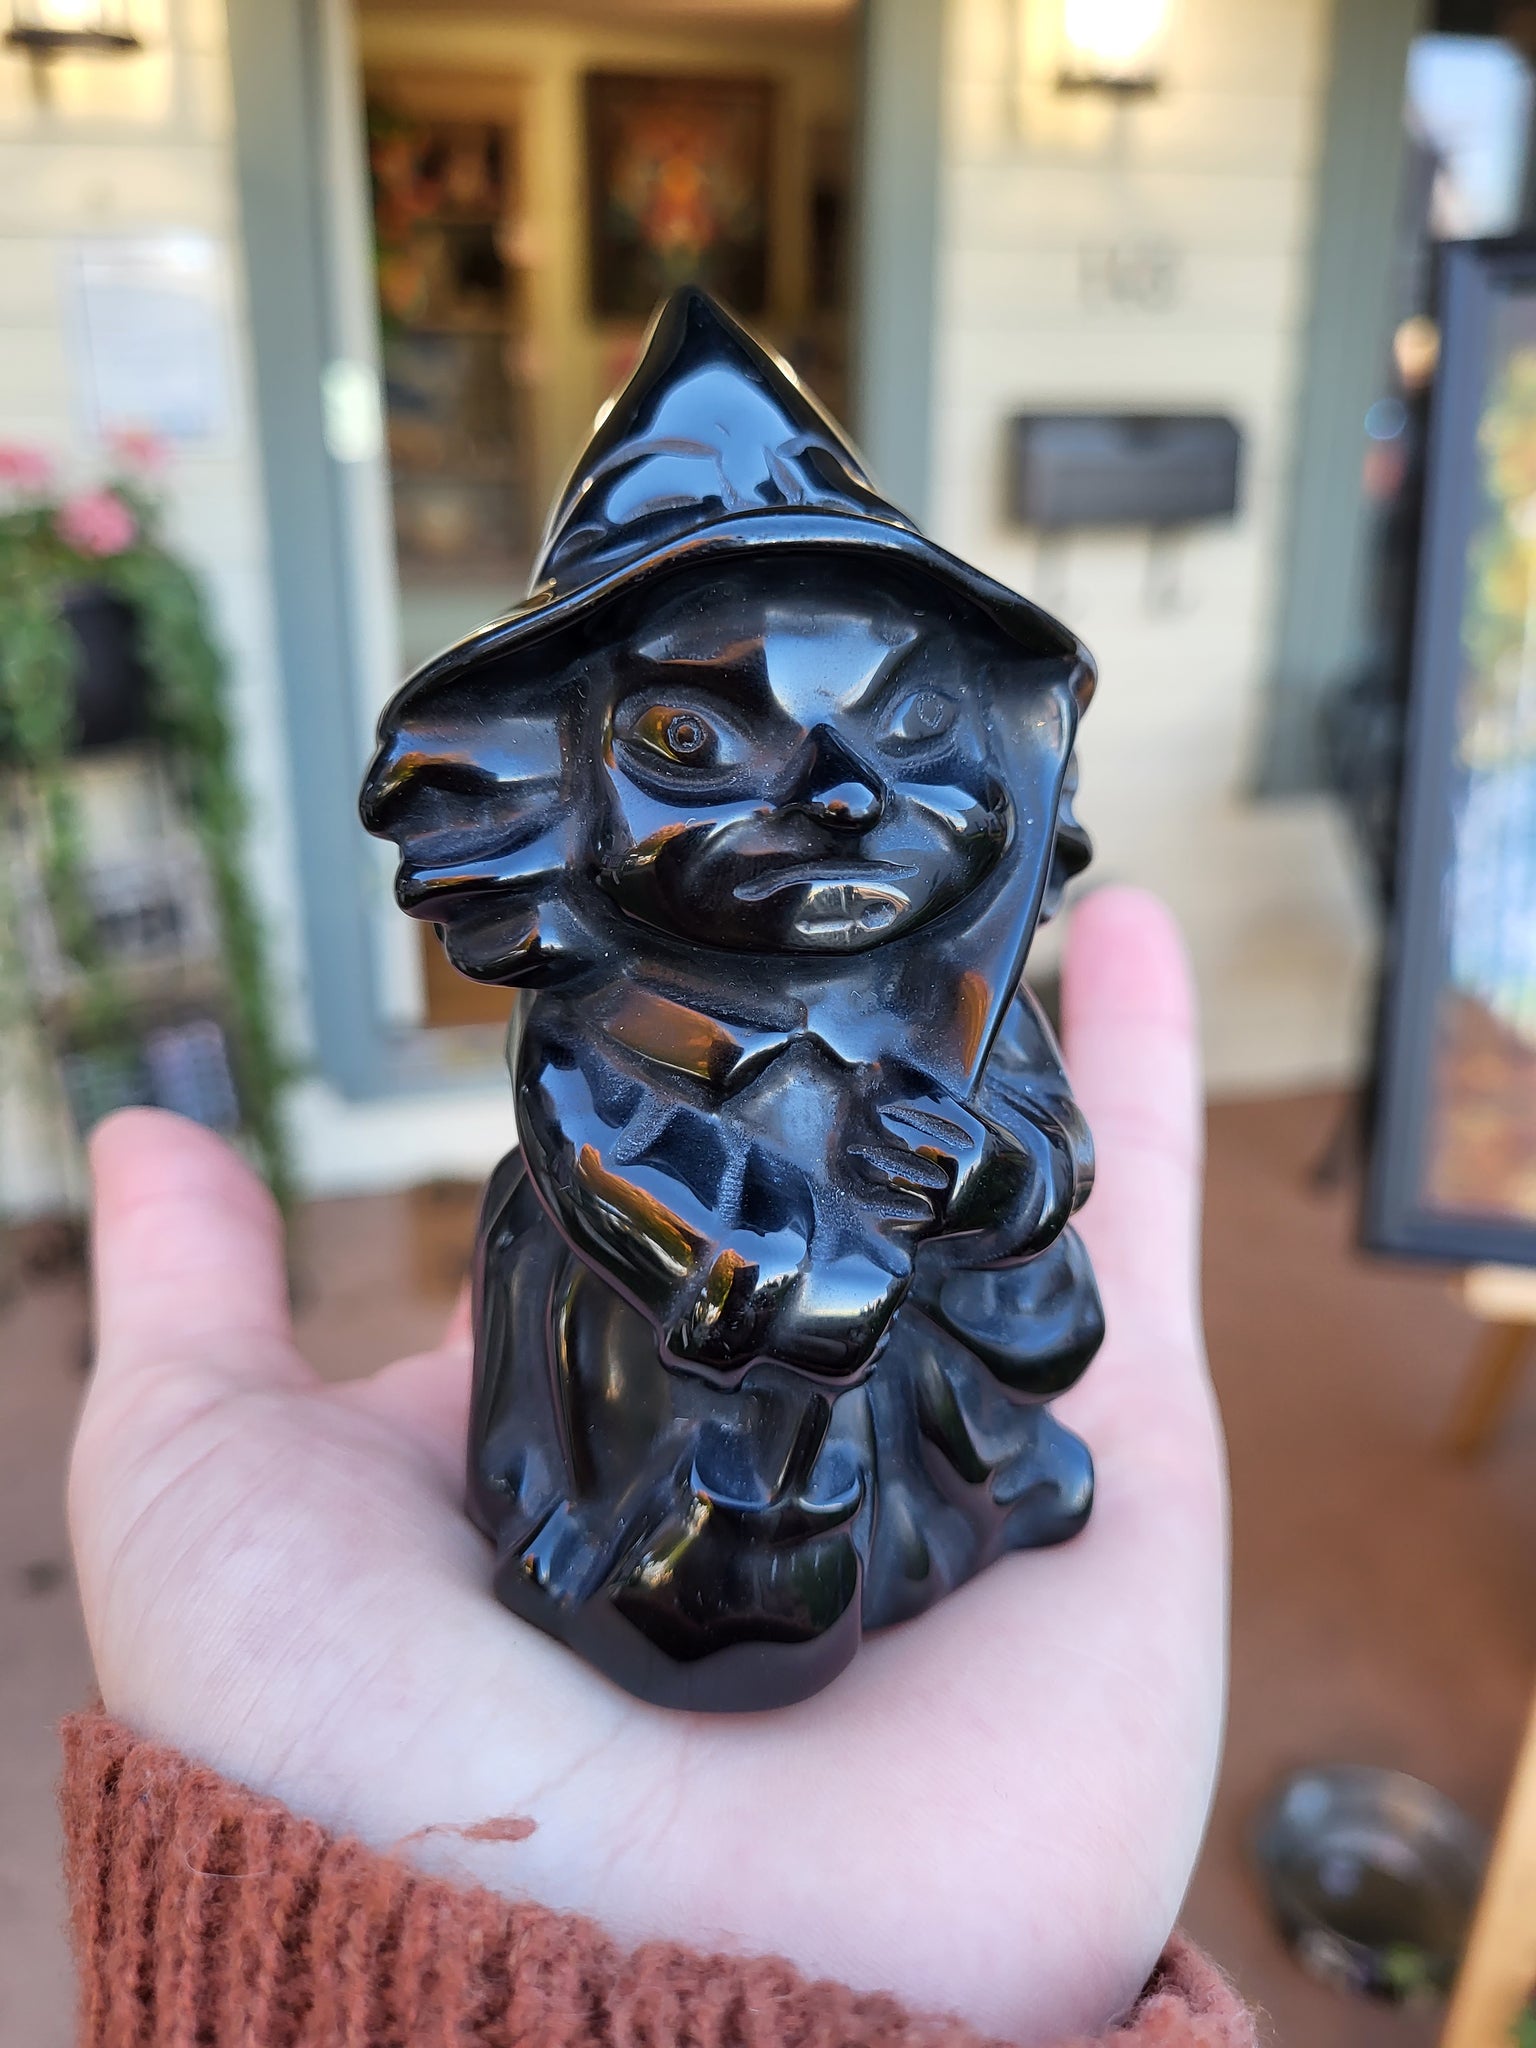 Obsidian Witch Figures